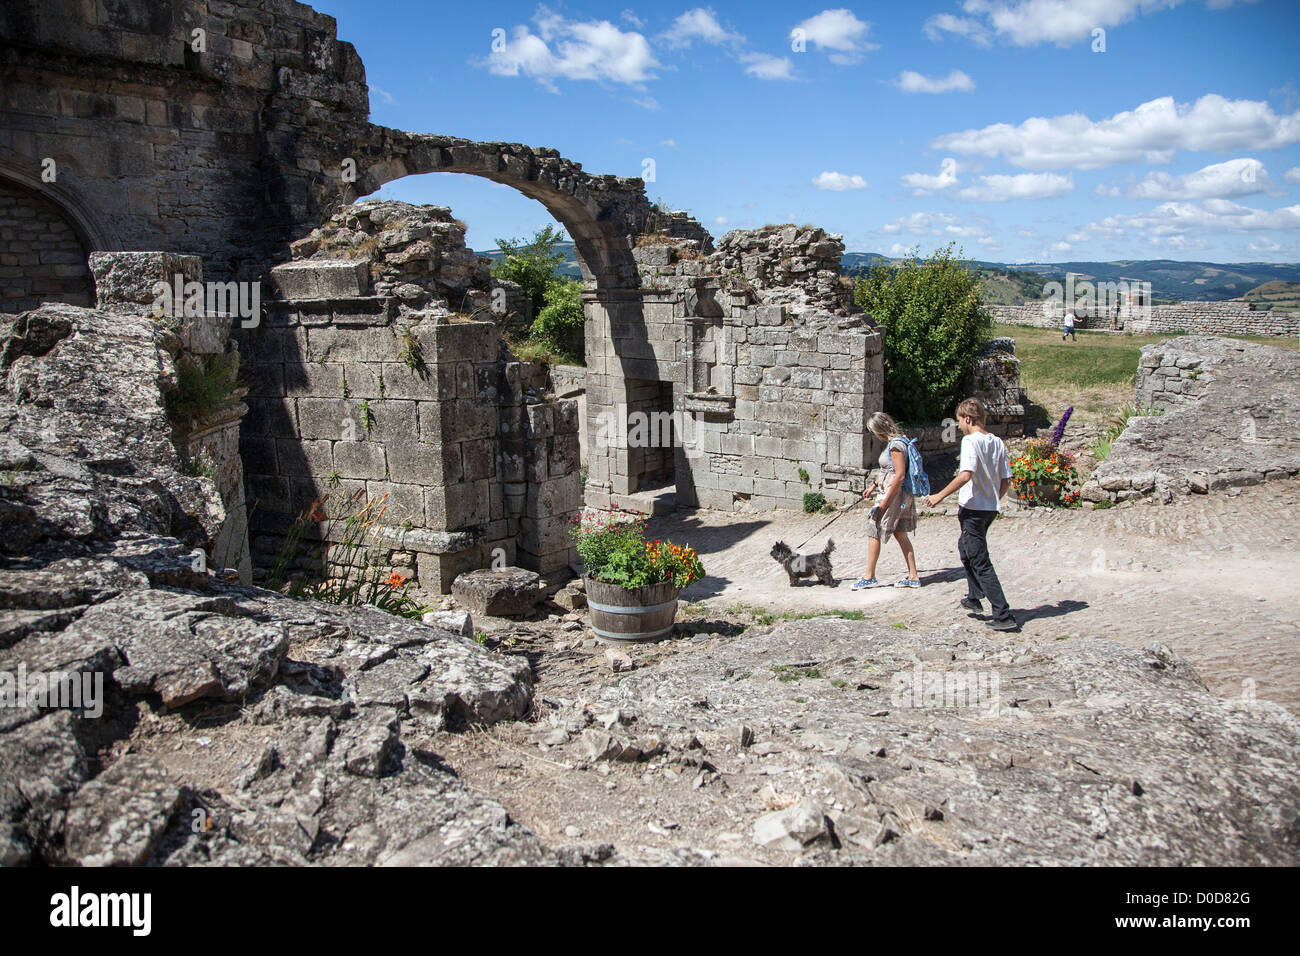 TOURISTS IN THE RUINS VISITING THE CHATEAU AND MEDIEVAL TOWN OF SEVERAC-LE-CHATEAU AVEYRON (12) FRANCE Stock Photo